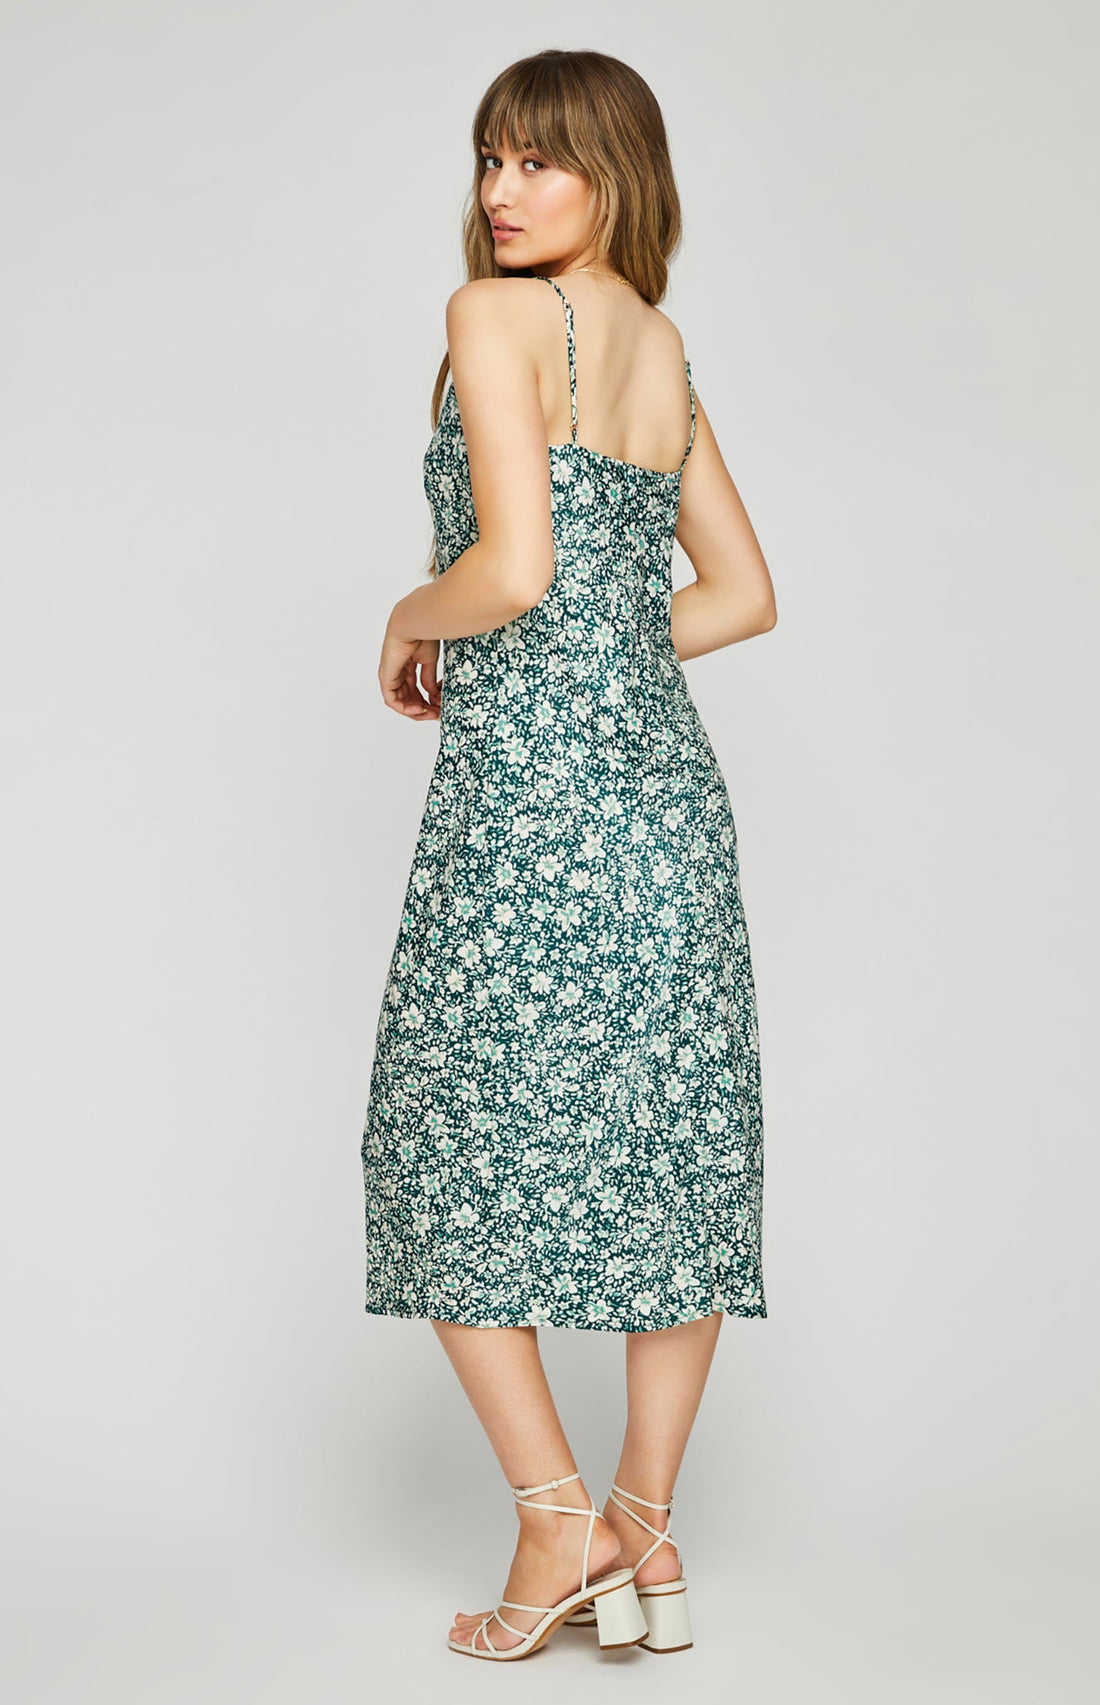 GENTLE FAWN SERENITY DRESS - PALM DITSY  GENTLE FAWN   